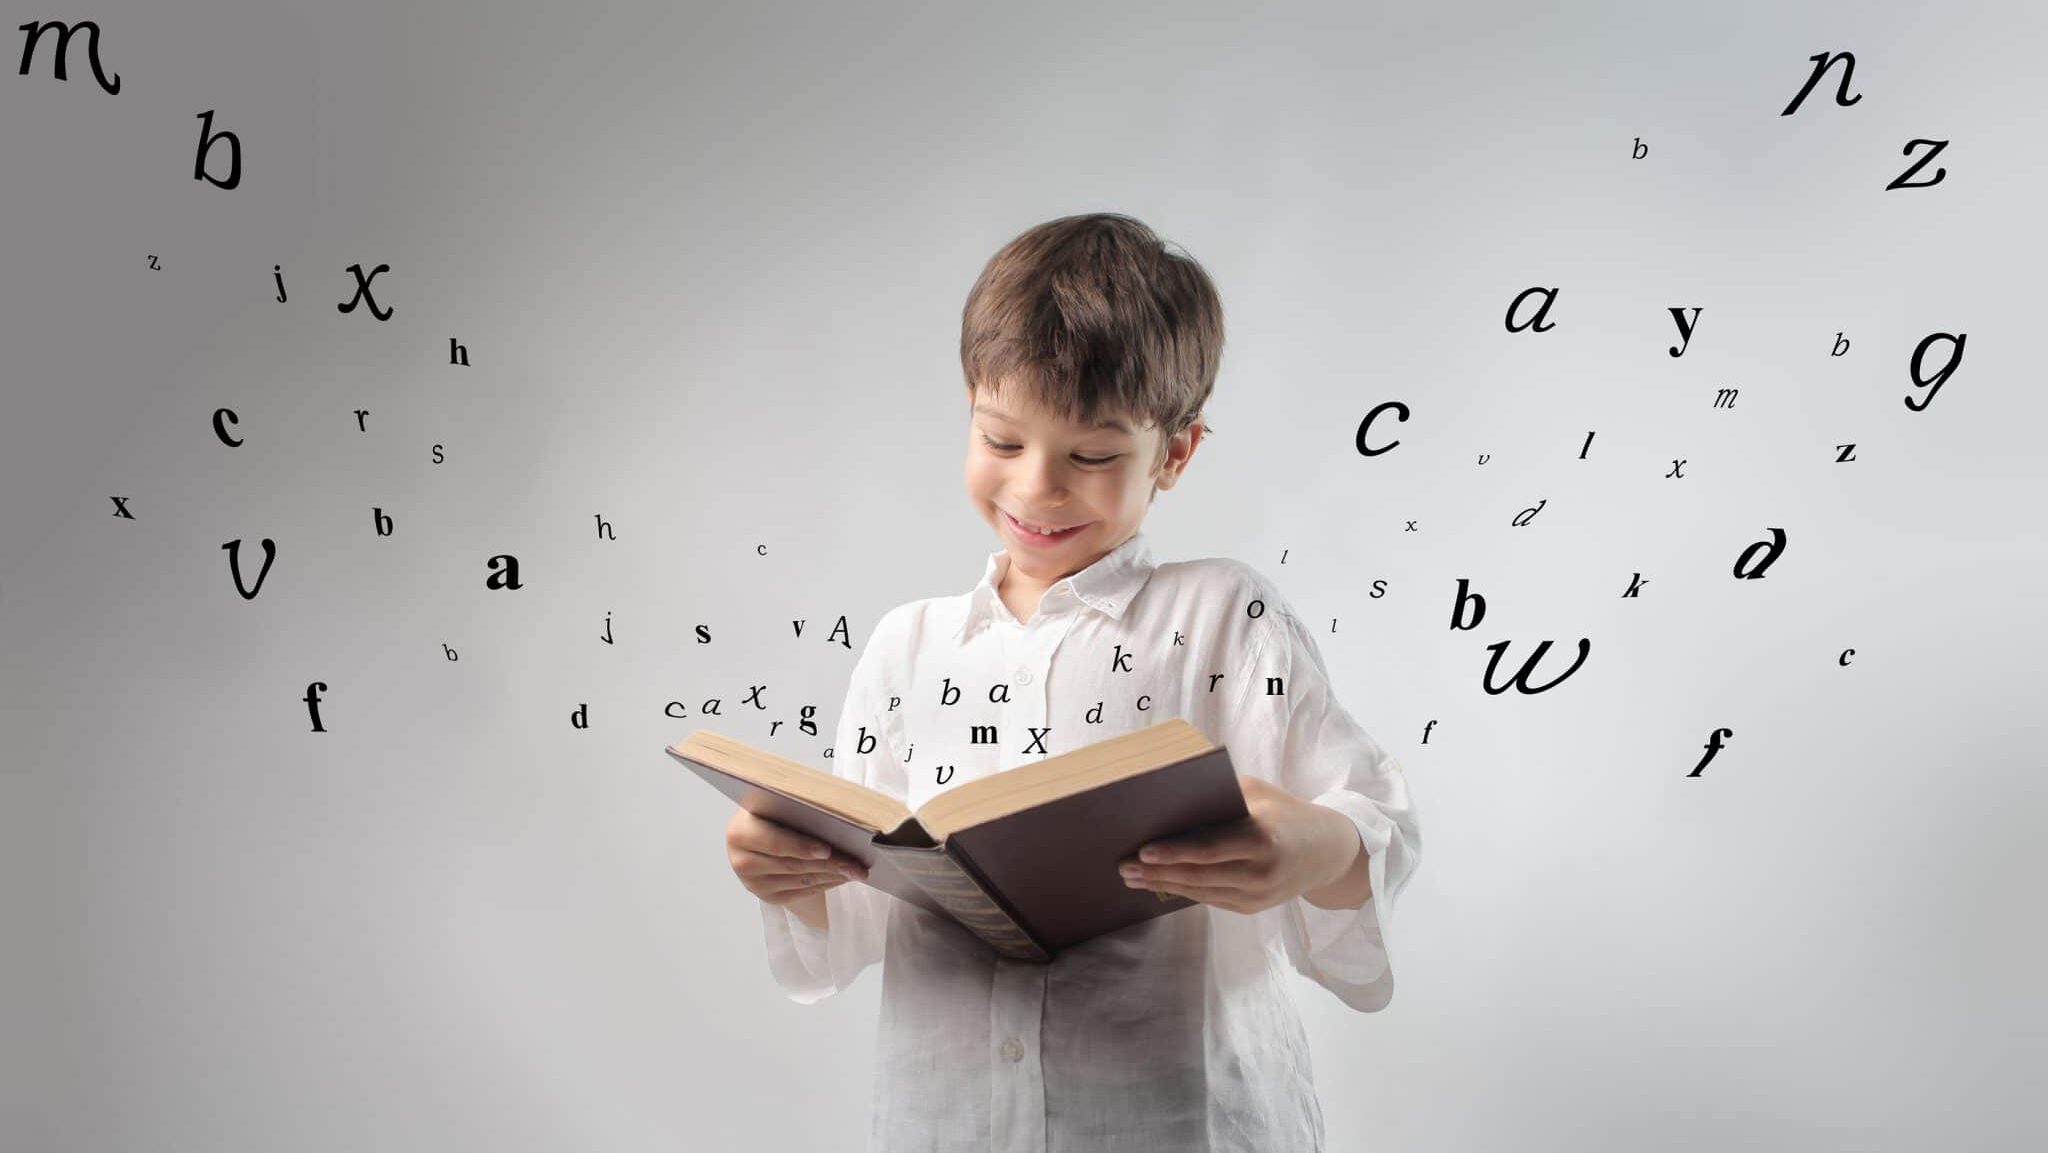 Smiling child reading a book with letters flying away from it